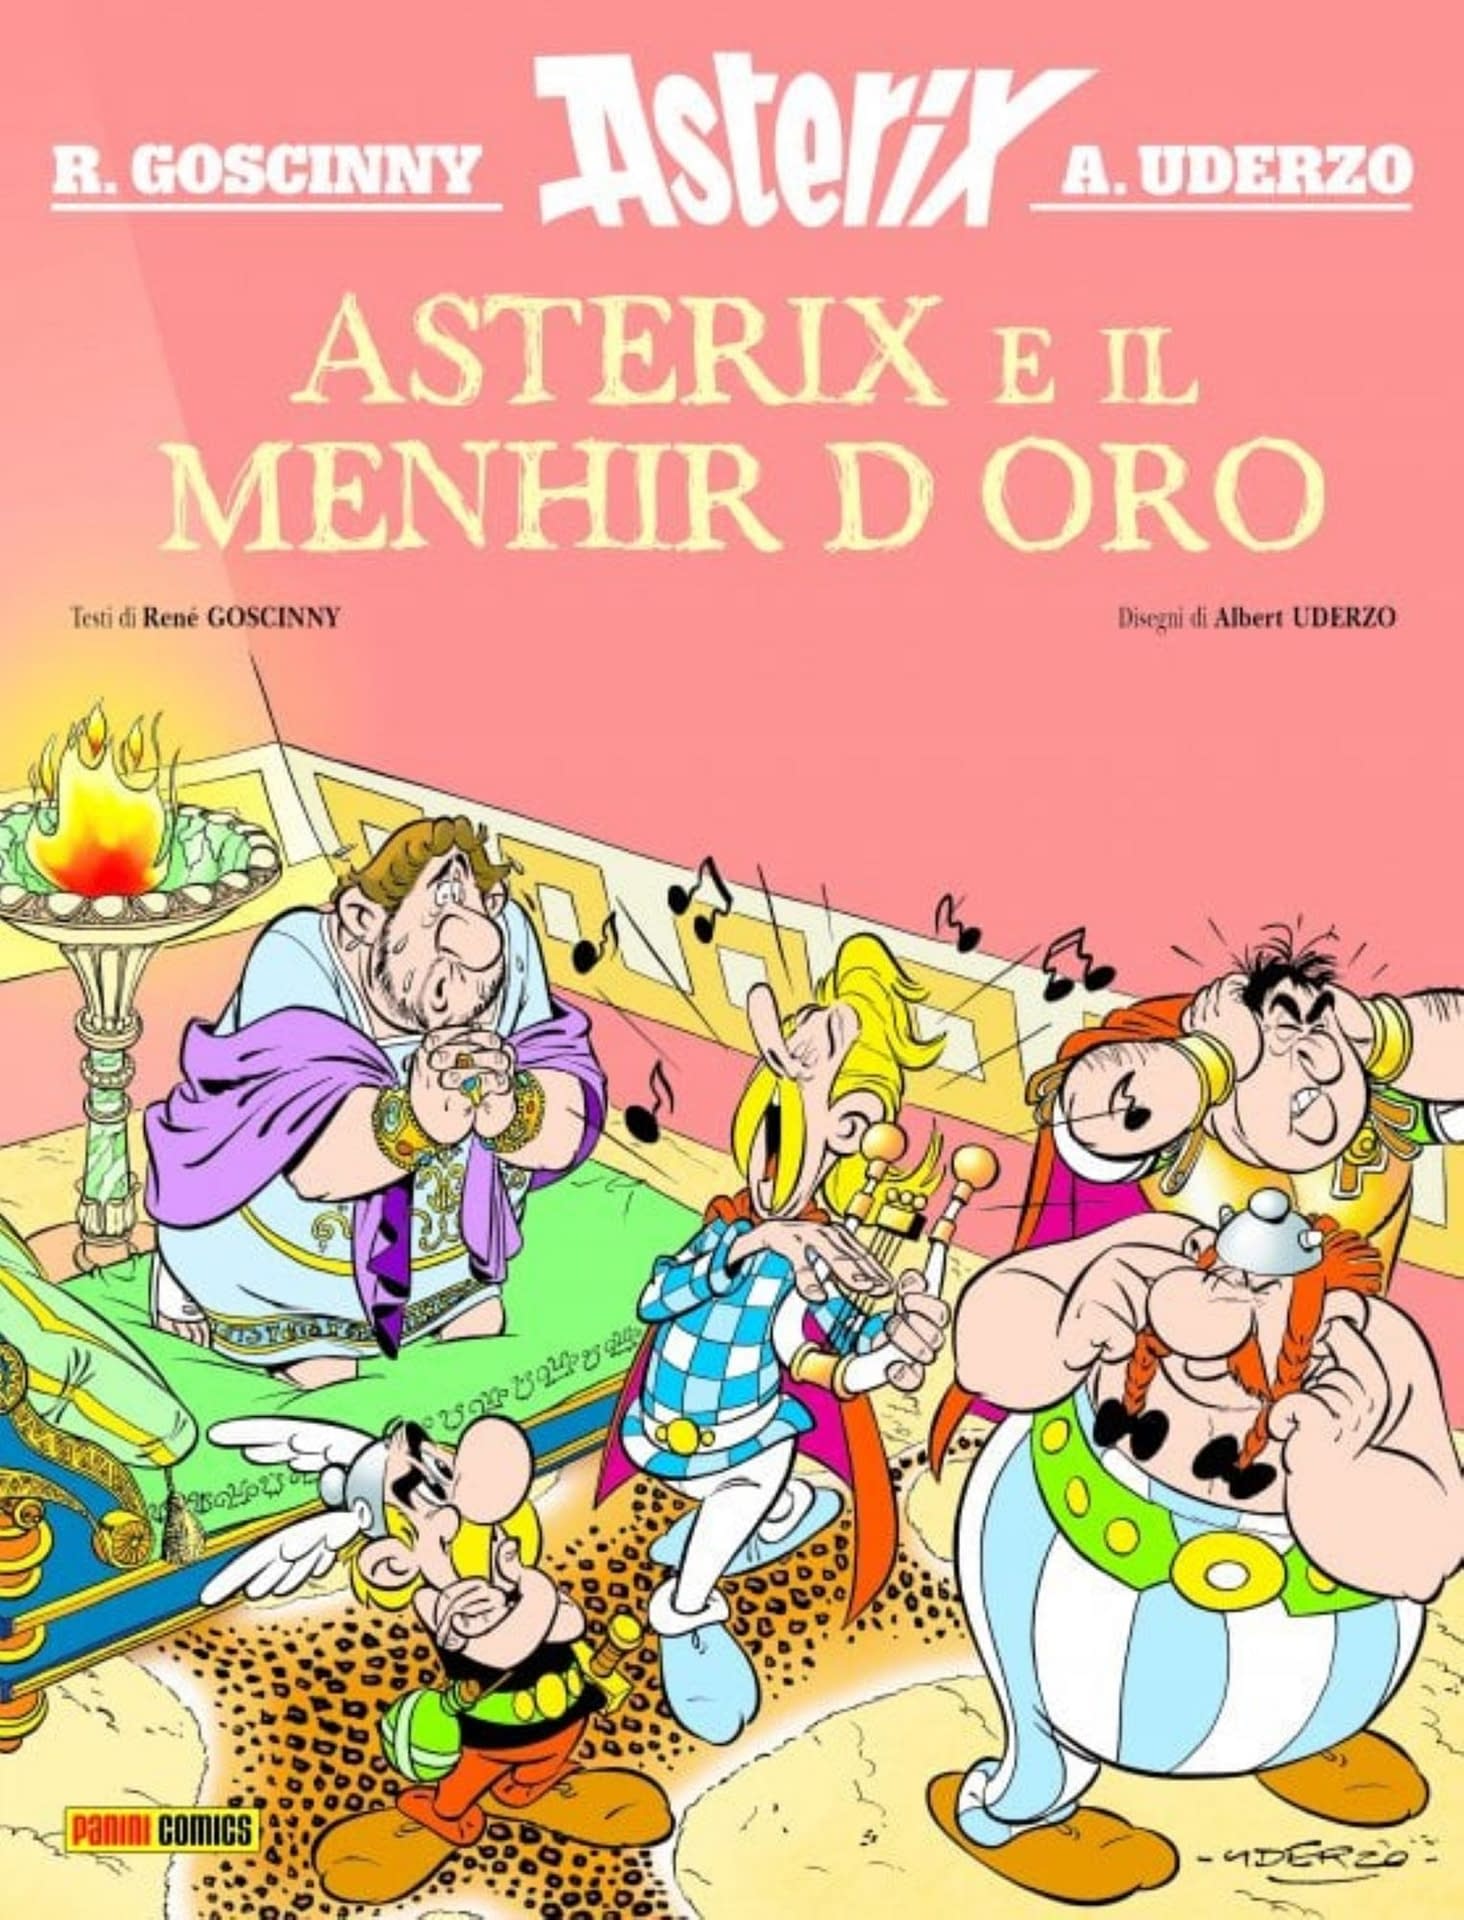 The new Asterix album will publish on 21st October 2021! - Asterix